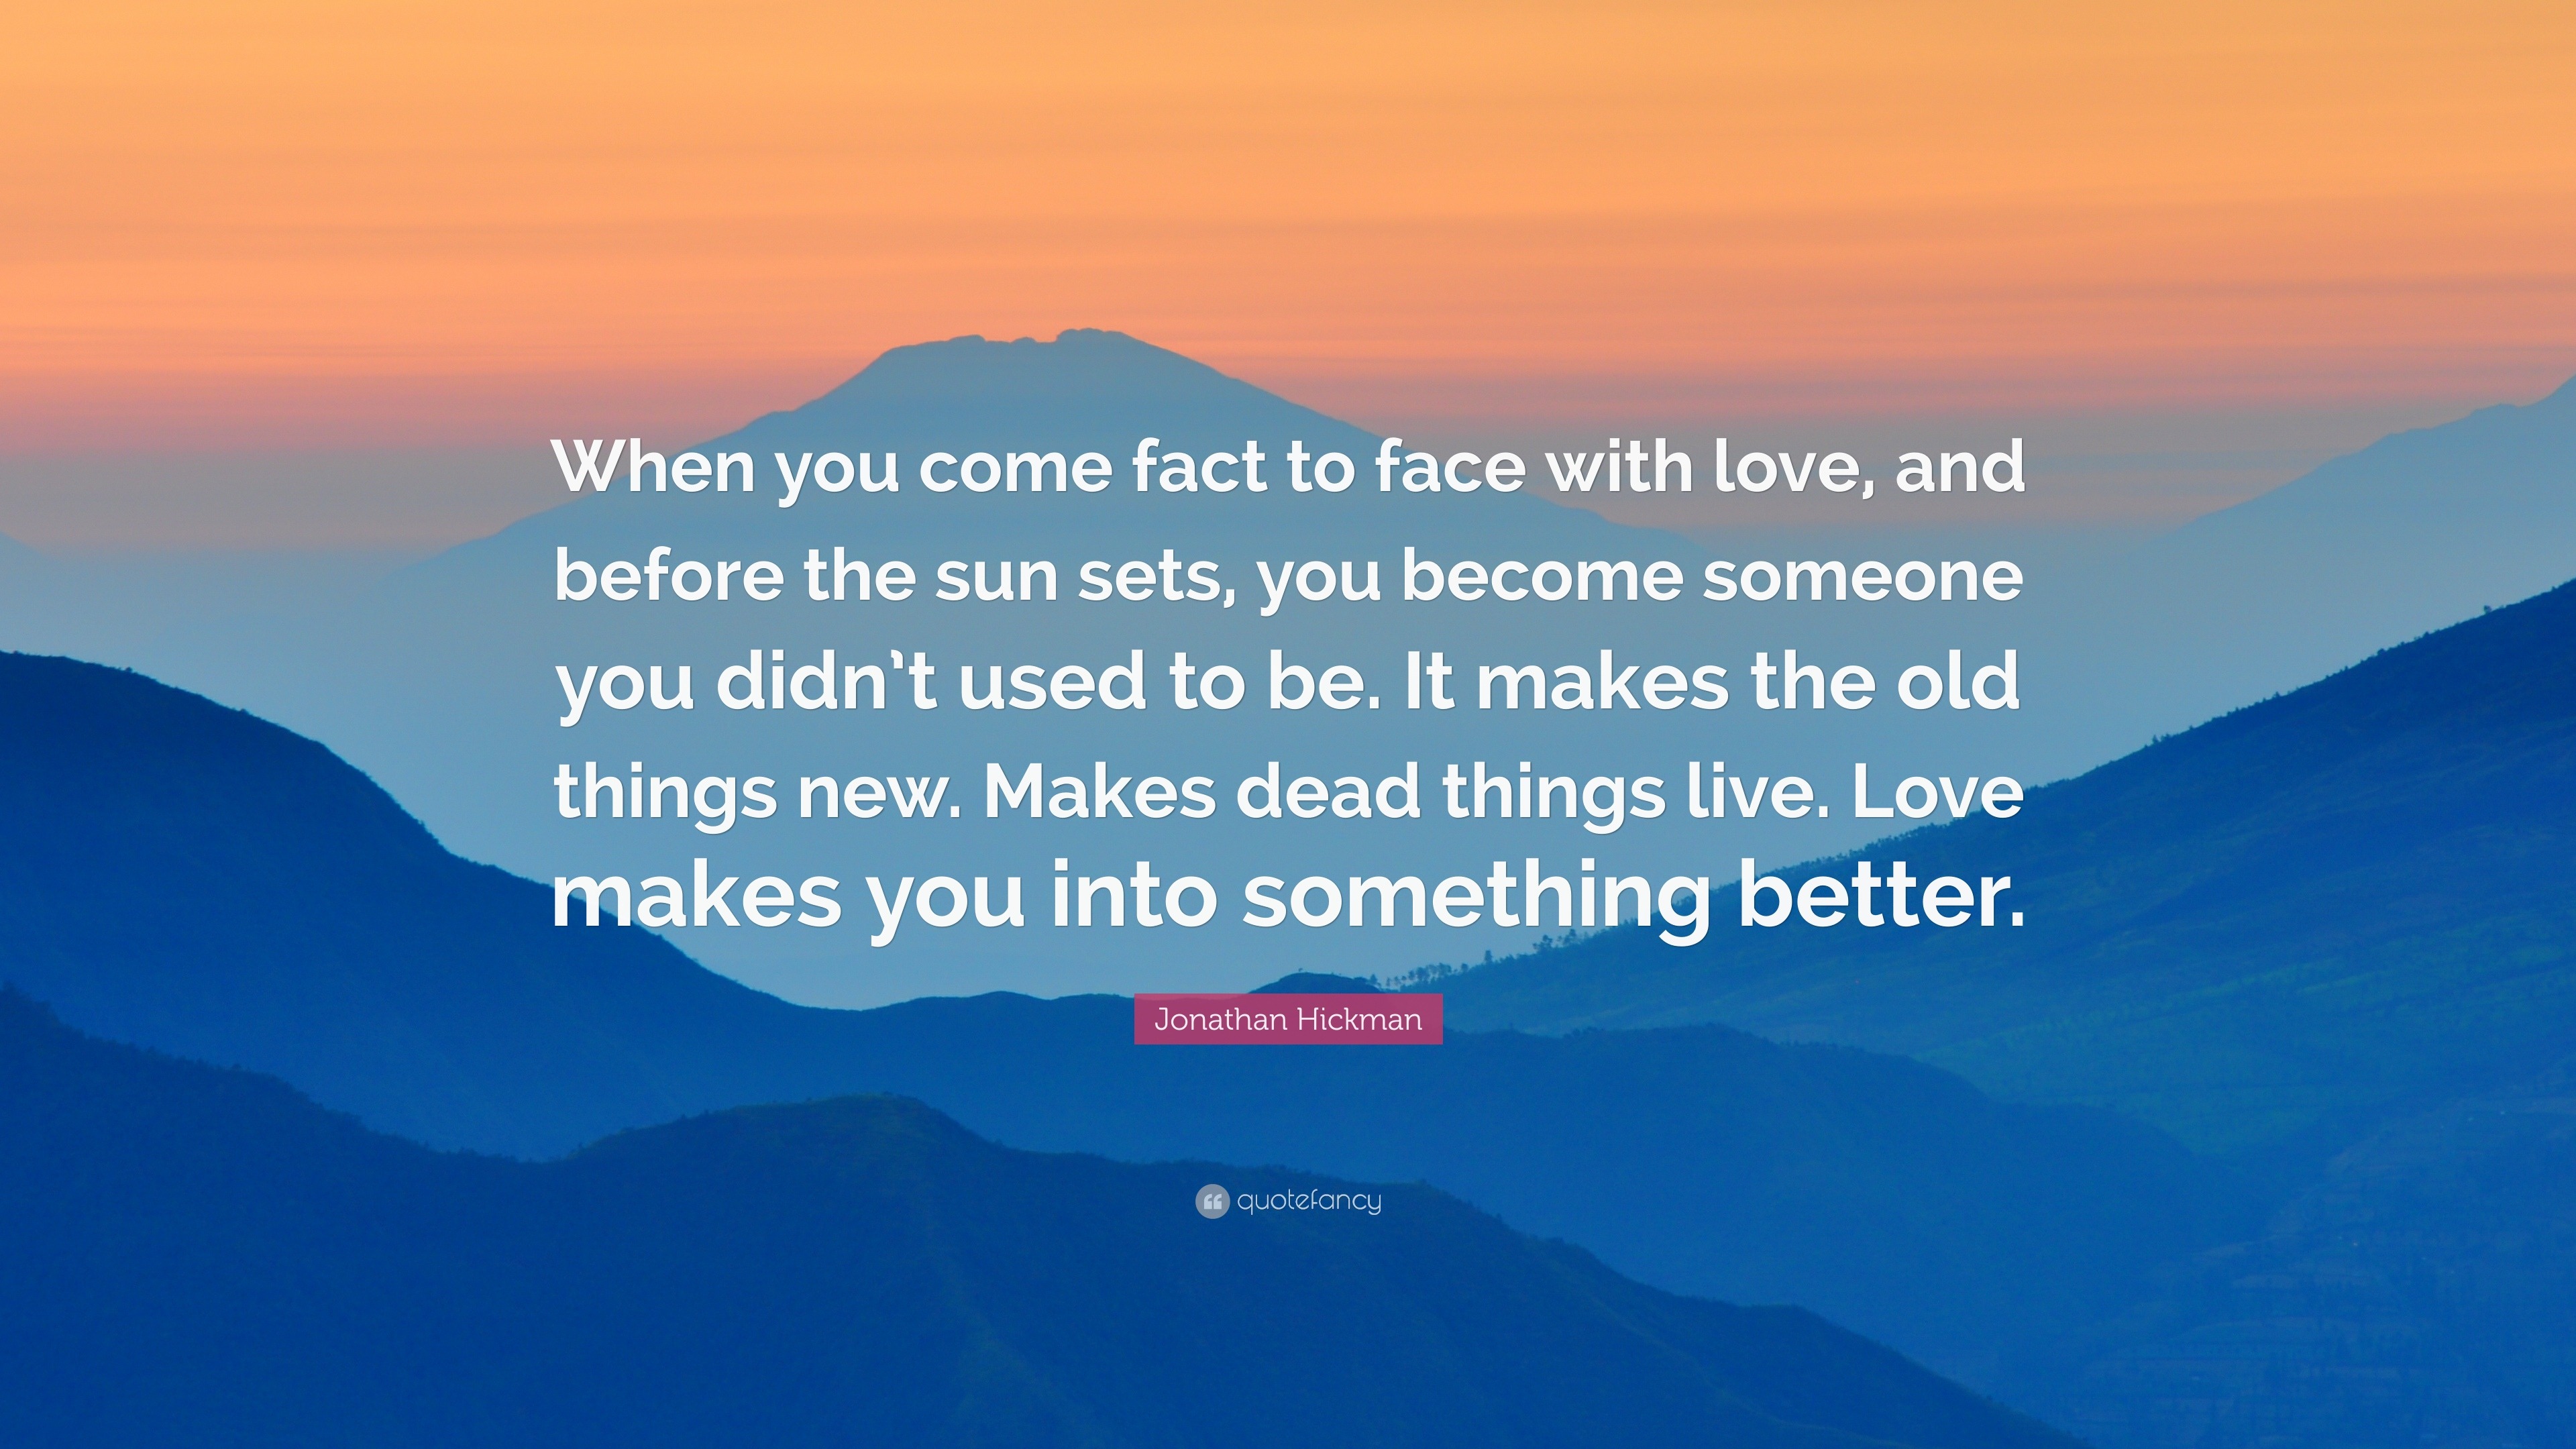 Jonathan Hickman Quote “When you e fact to face with love and before